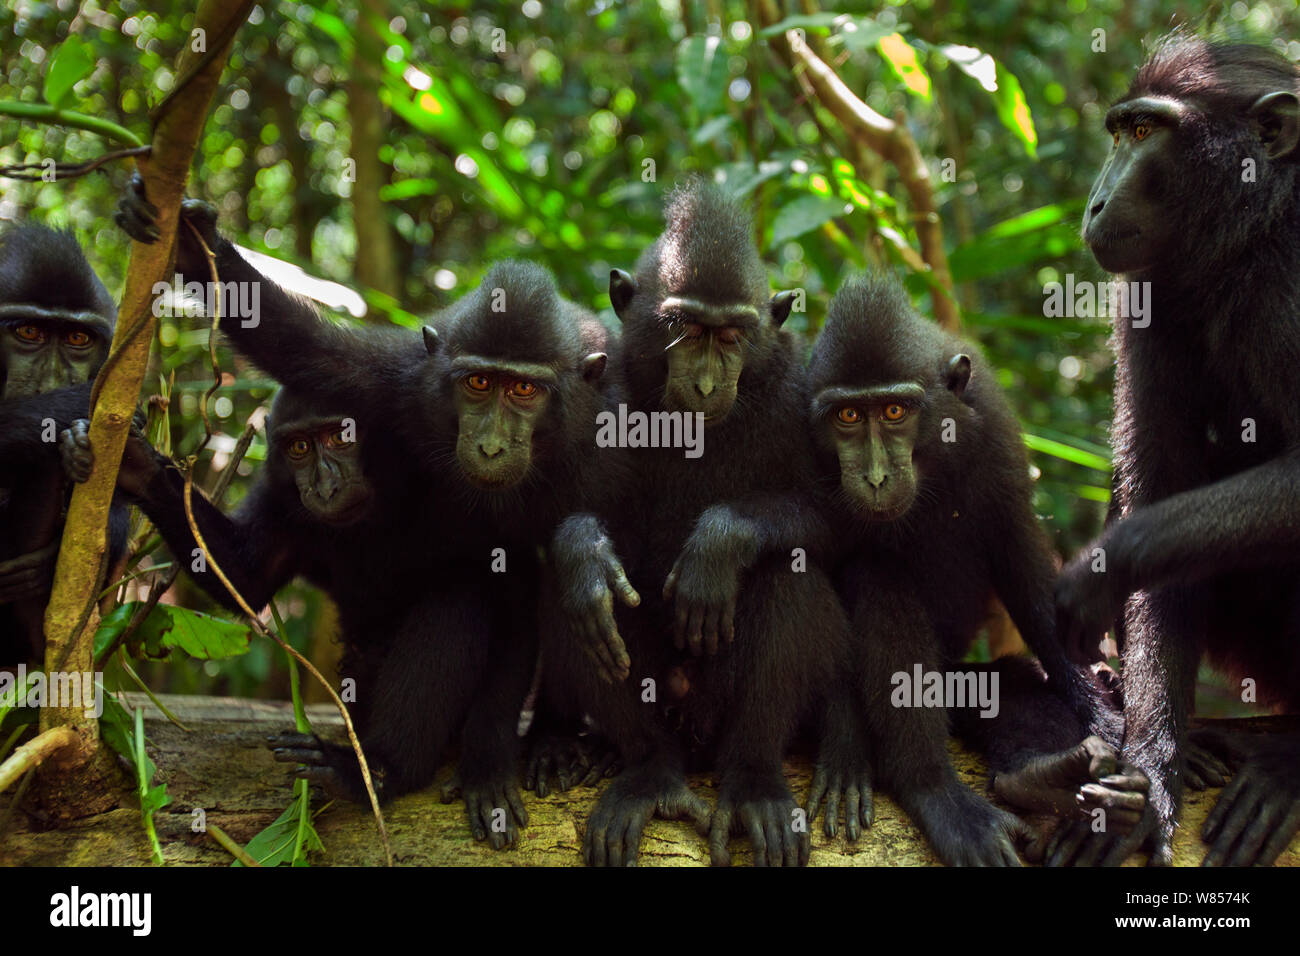 Celebes / Black crested macaque (Macaca nigra)  group watching with curiosity, Tangkoko National Park, Sulawesi, Indonesia. Stock Photo